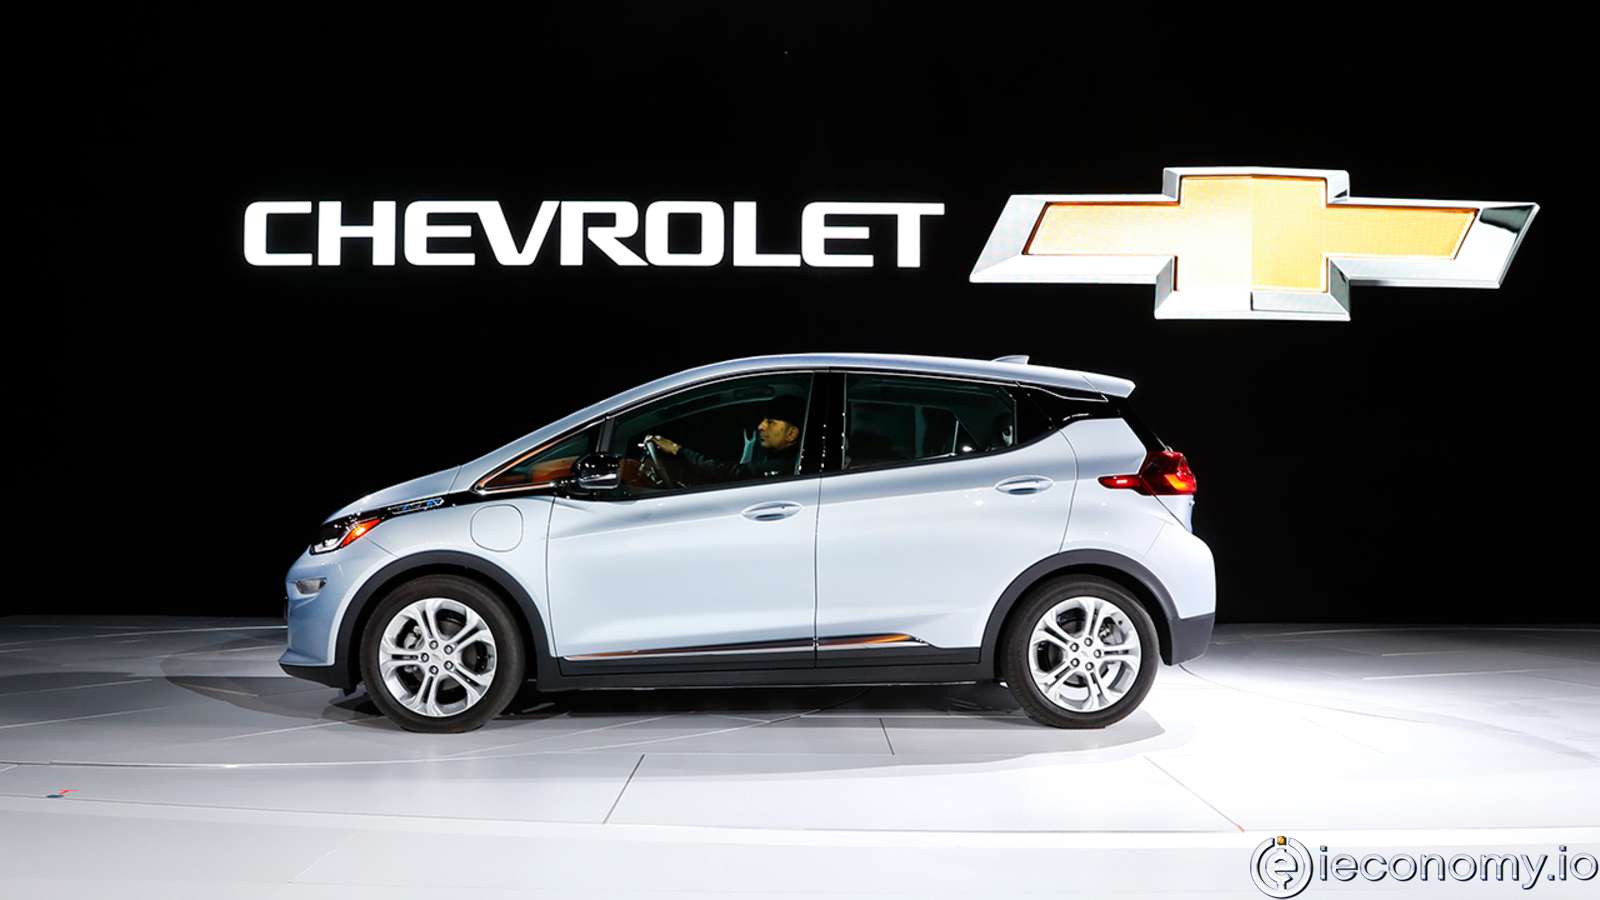 GM announced that all Bolt EV models must now be recalled